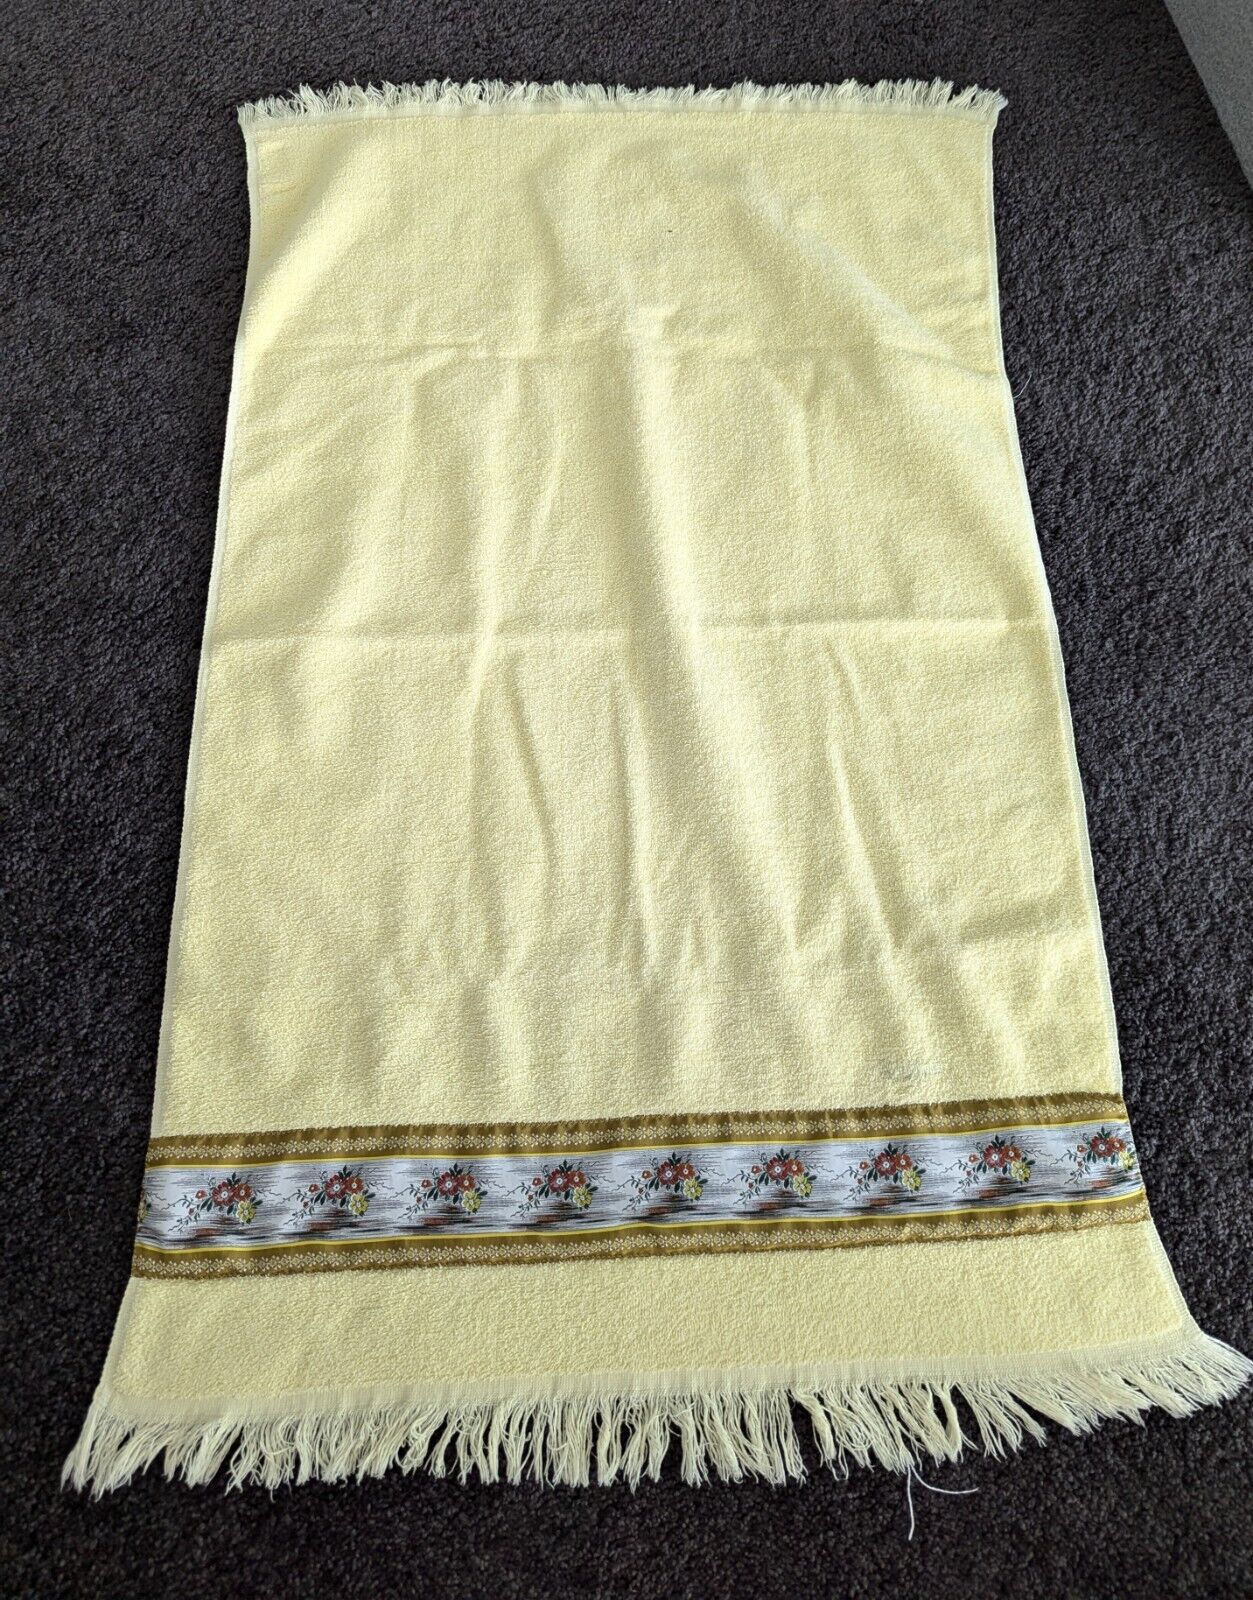 Vtg Dundee Golden Crown Towel Bath Yellow With Flower Ribbon Trim USA 38\